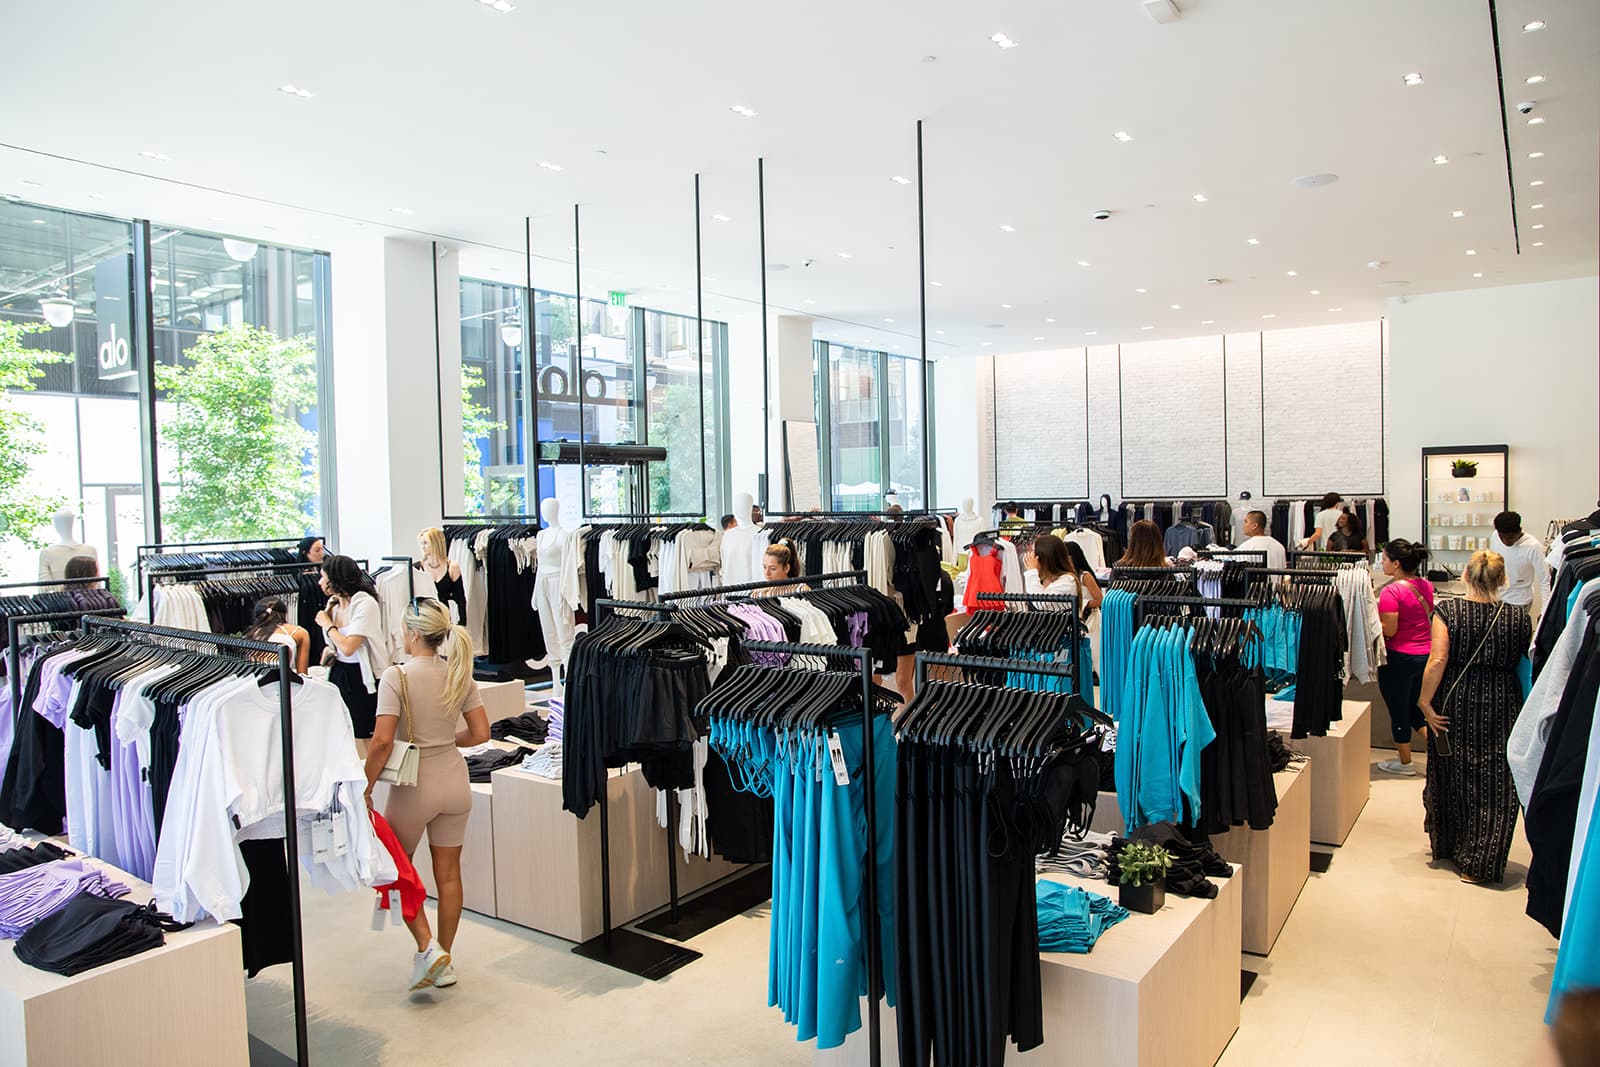 A photo of the inside of the Alo Boston Sanctuary showcasing many shoppers looking through various colored activewear in a large, naturally lit space.  